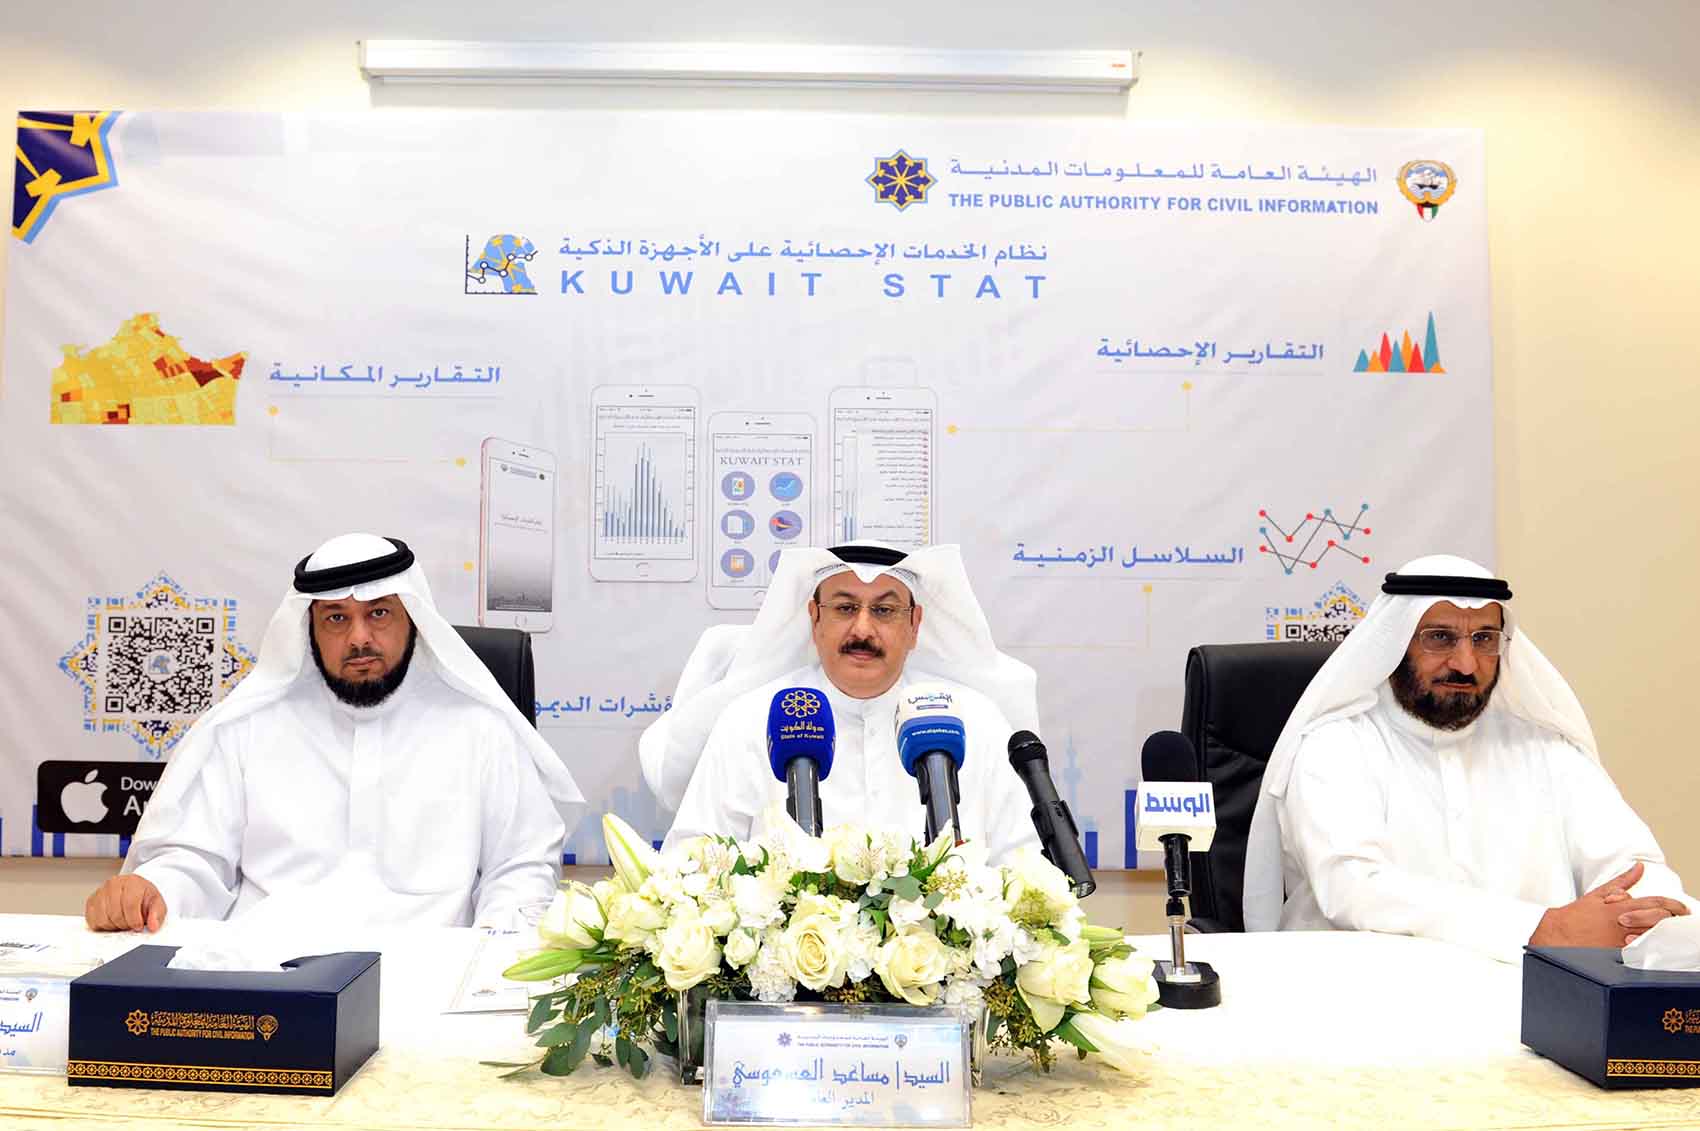 Kuwait's Public Authority for Civil Information (PACI) press conference to announce the launch of "Kuwait Stat" application on smart phones